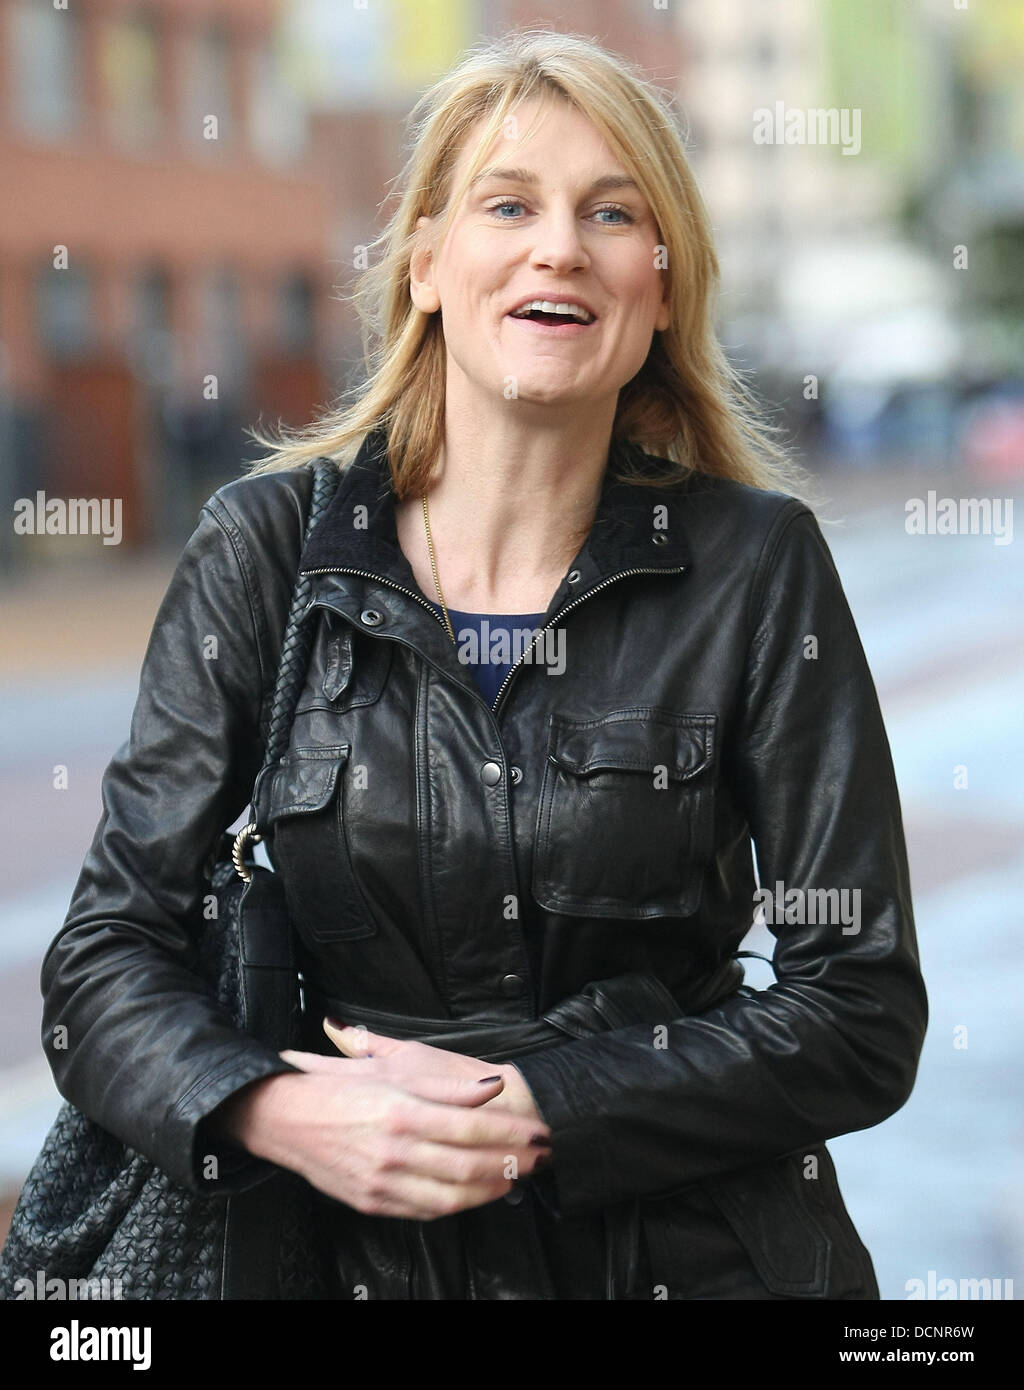 Sally bercow at the itv studios london hi-res stock photography and images  - Alamy